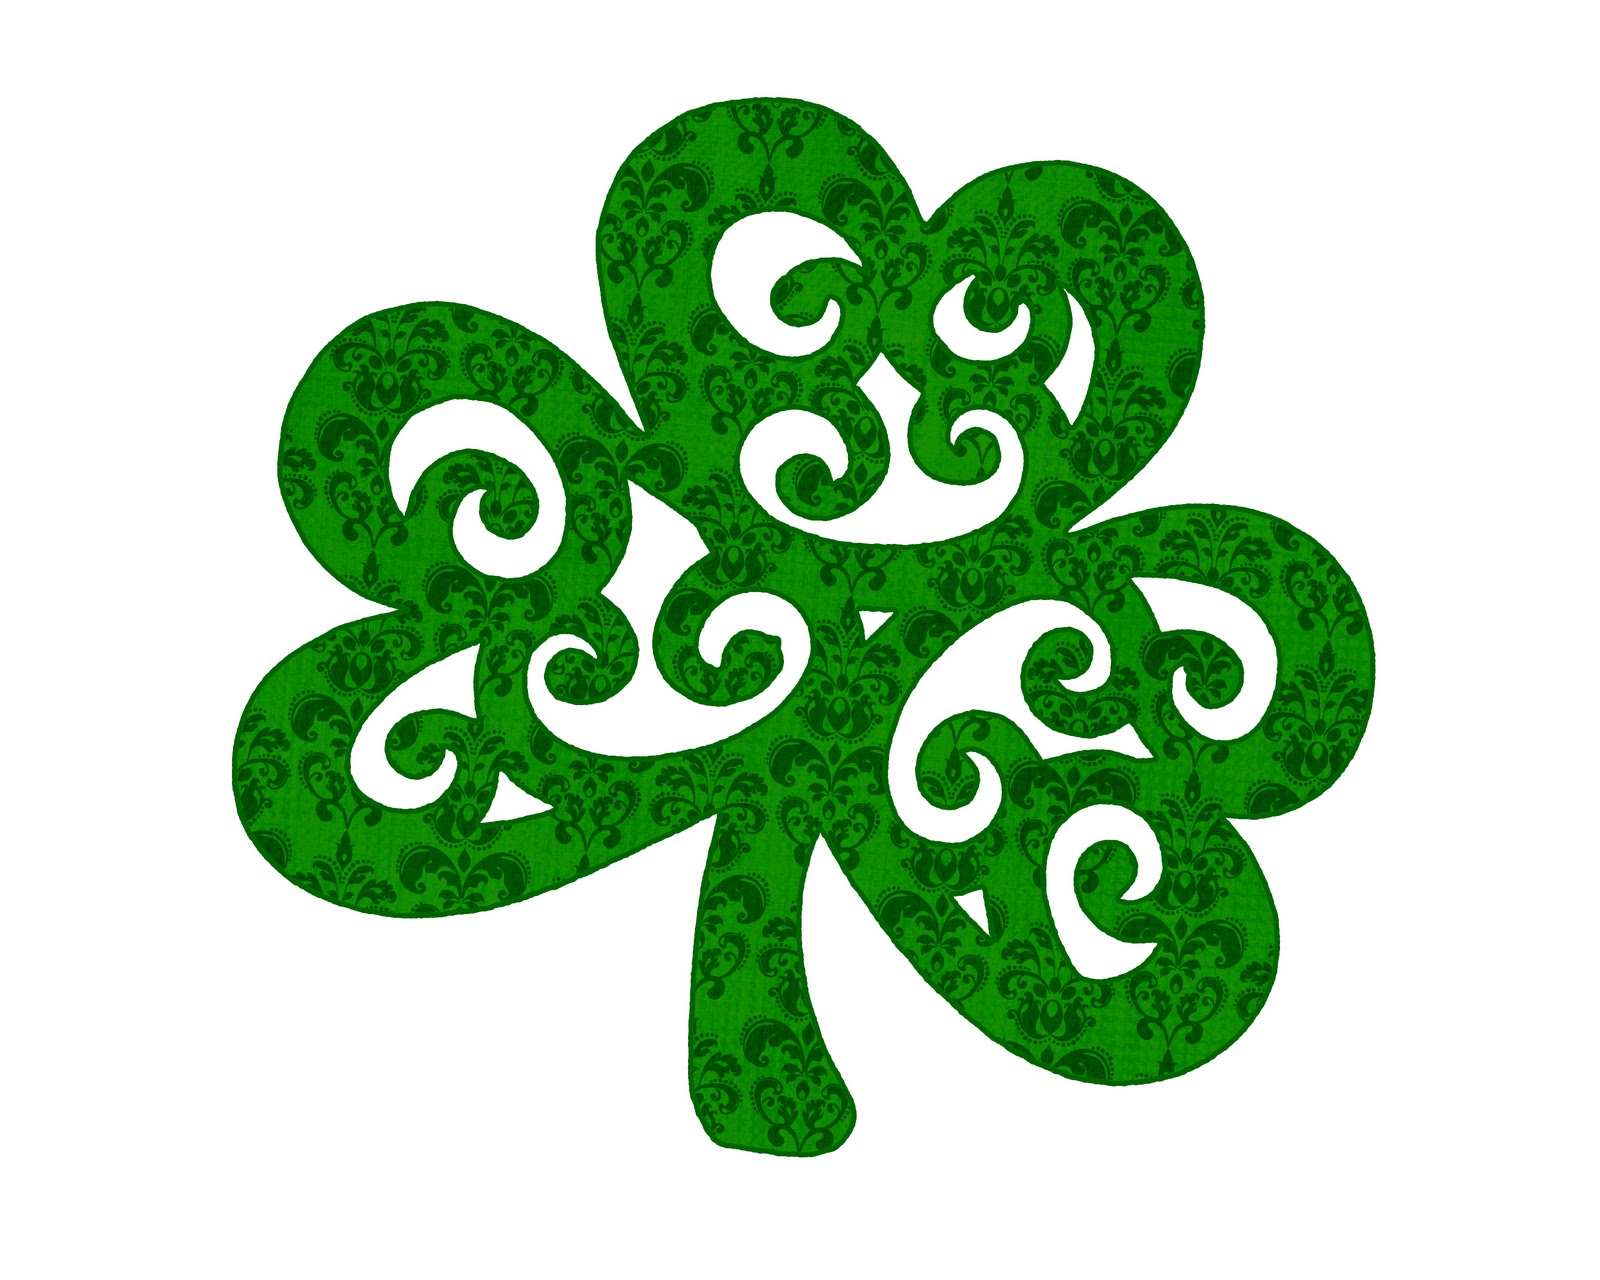 Official Site Of The Scottish Club Of Tulsa - St Patty's Day Shamrock - HD Wallpaper 